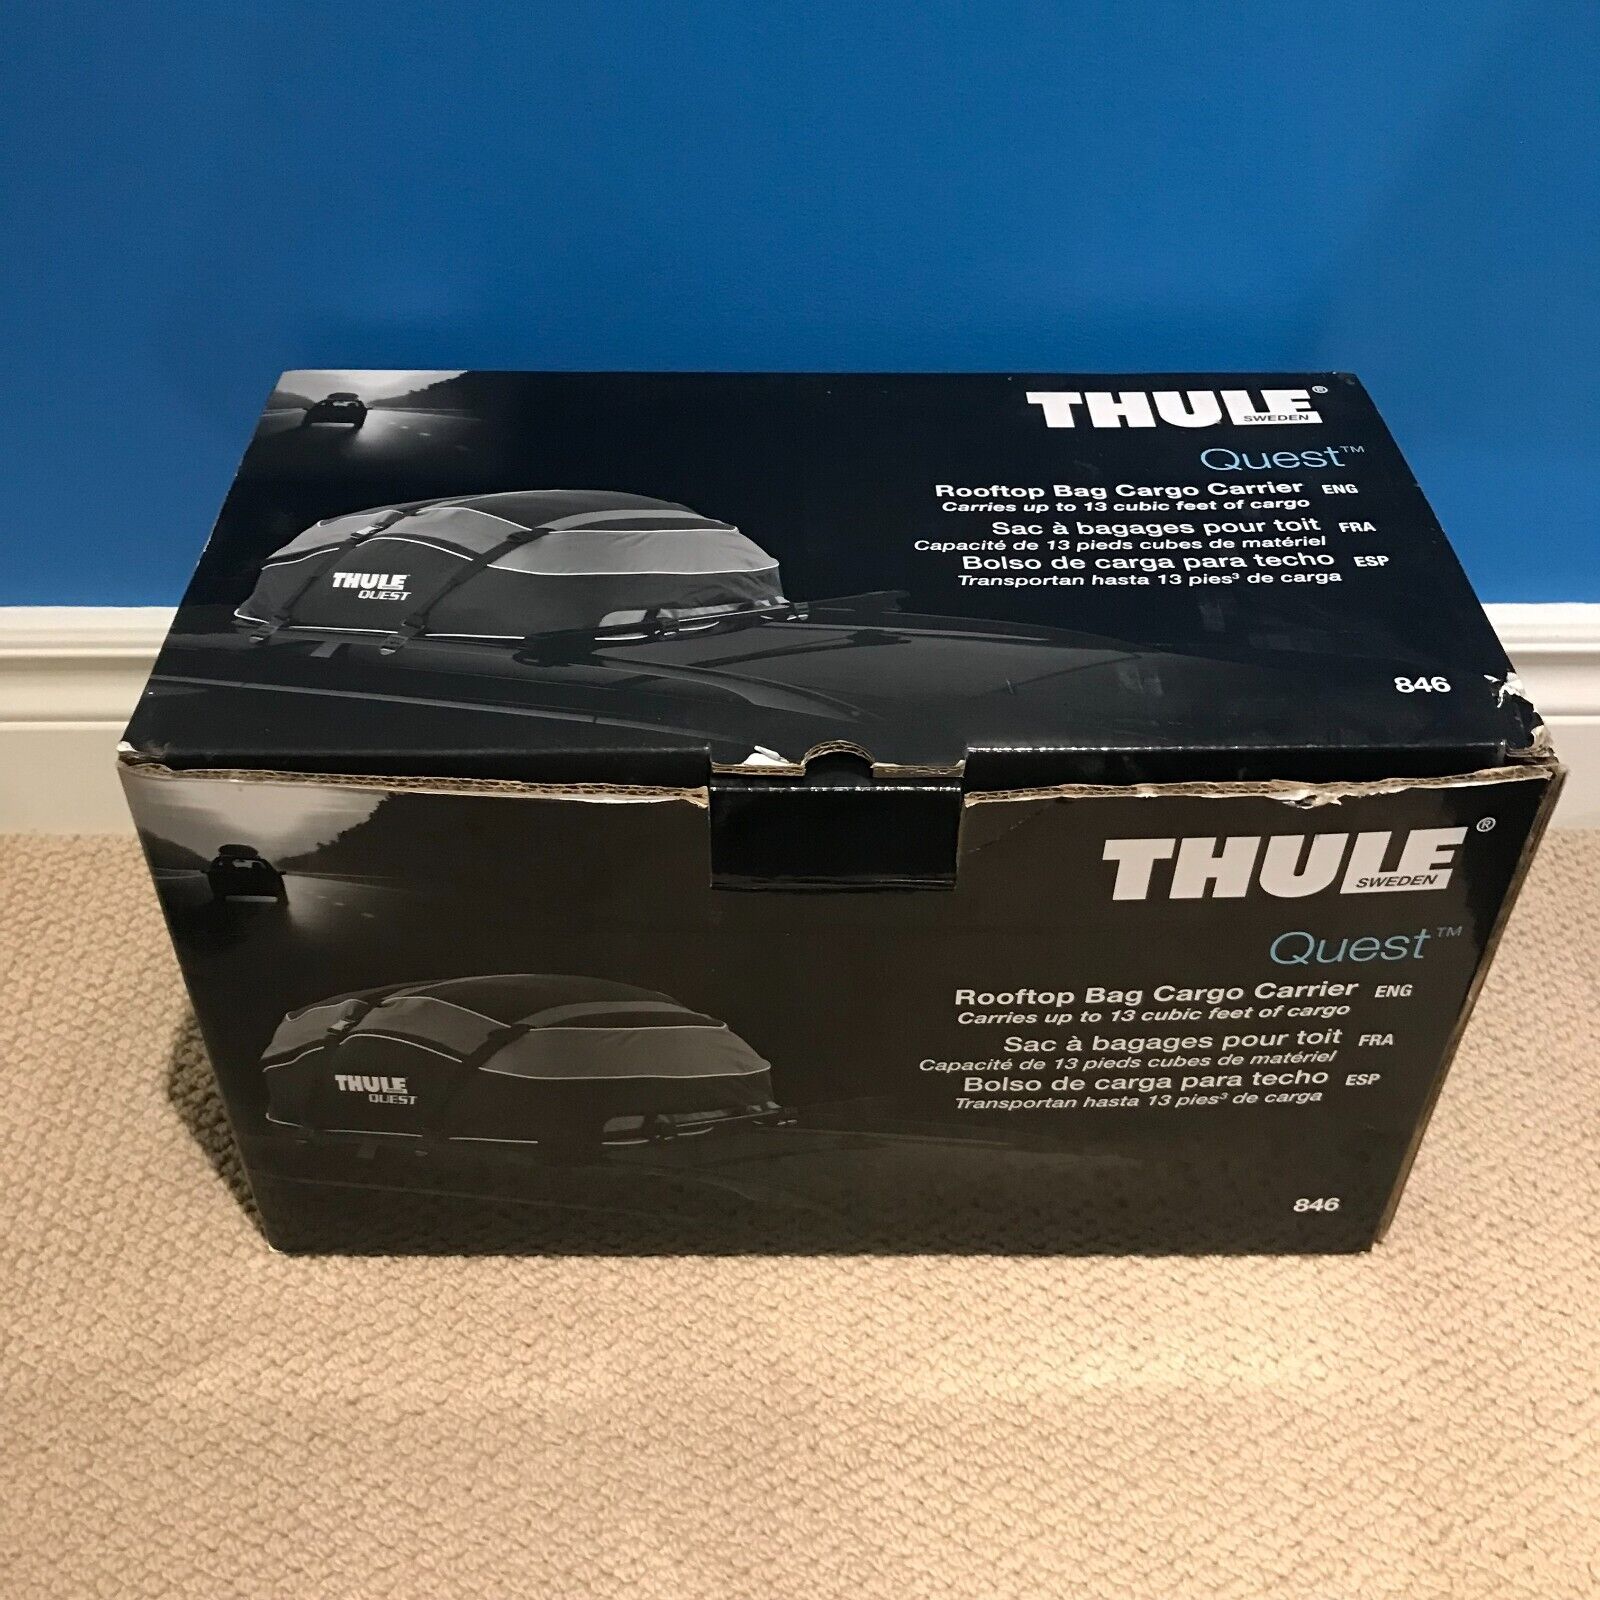 Thule Quest 846 Rooftop Bag Cargo Carrier